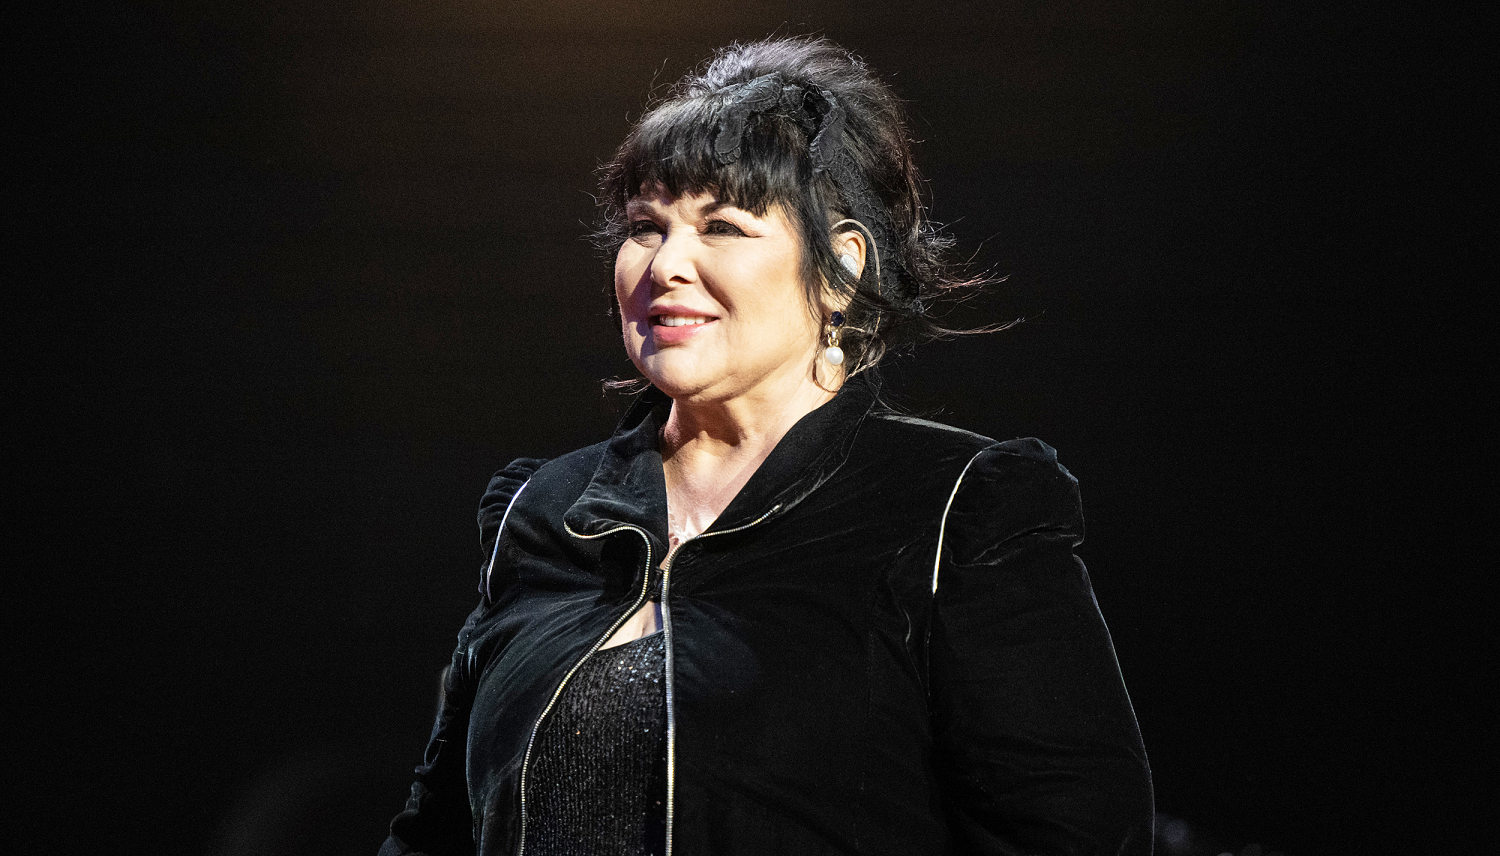 Heart’s Ann Wilson undergoing  chemotherapy for cancer, band postpones tour